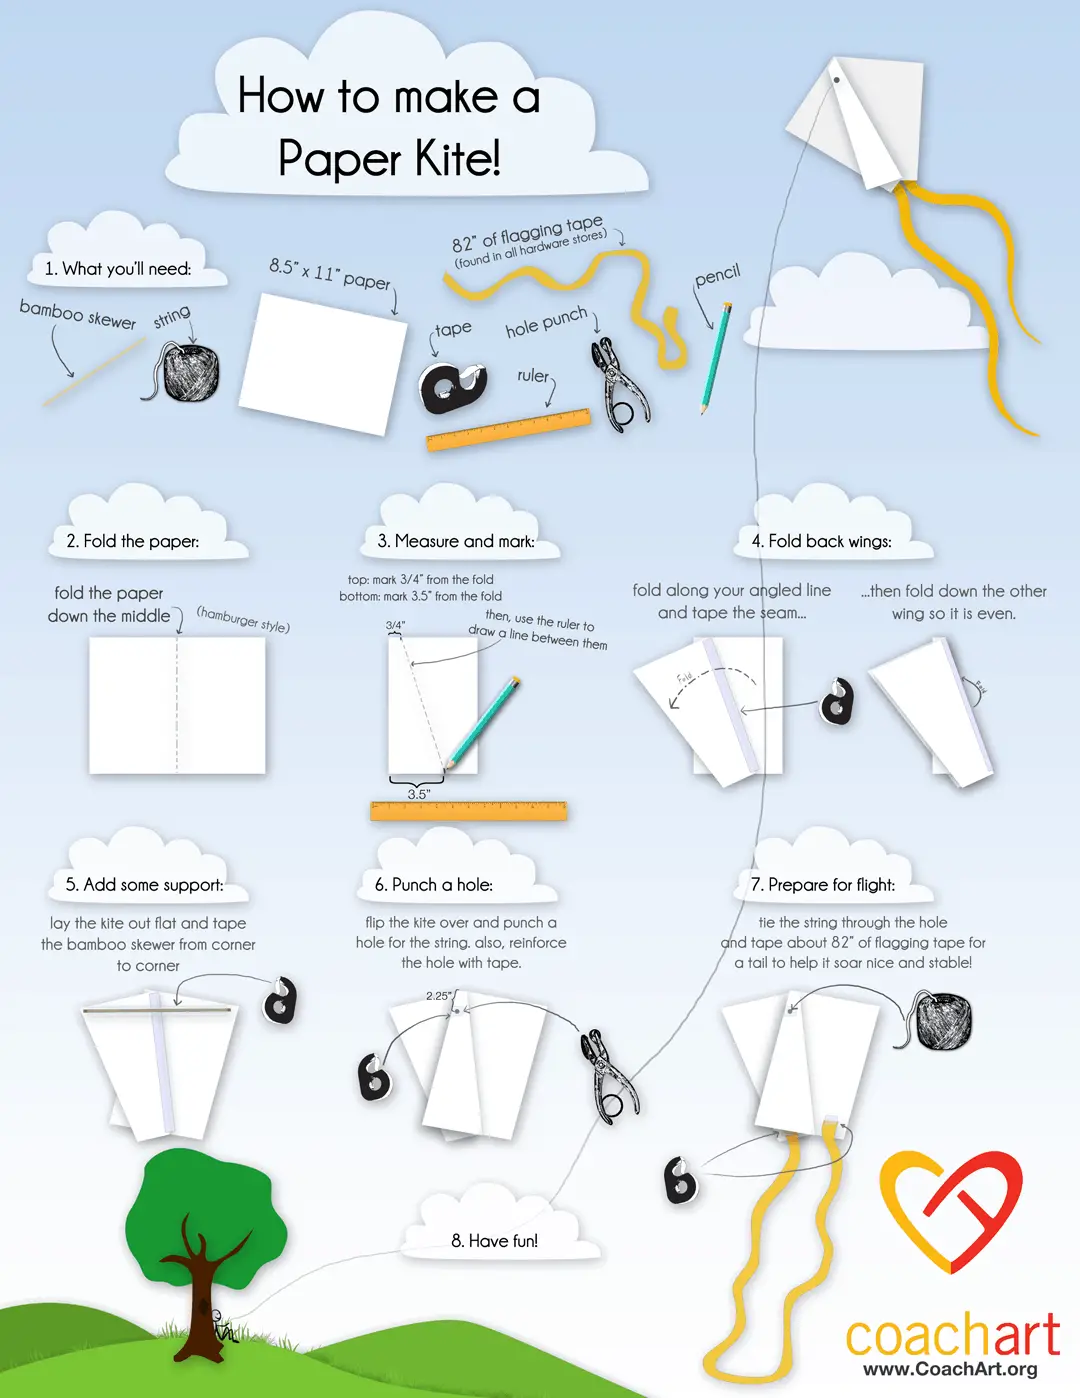 How To Make a Paper Kite Infographic